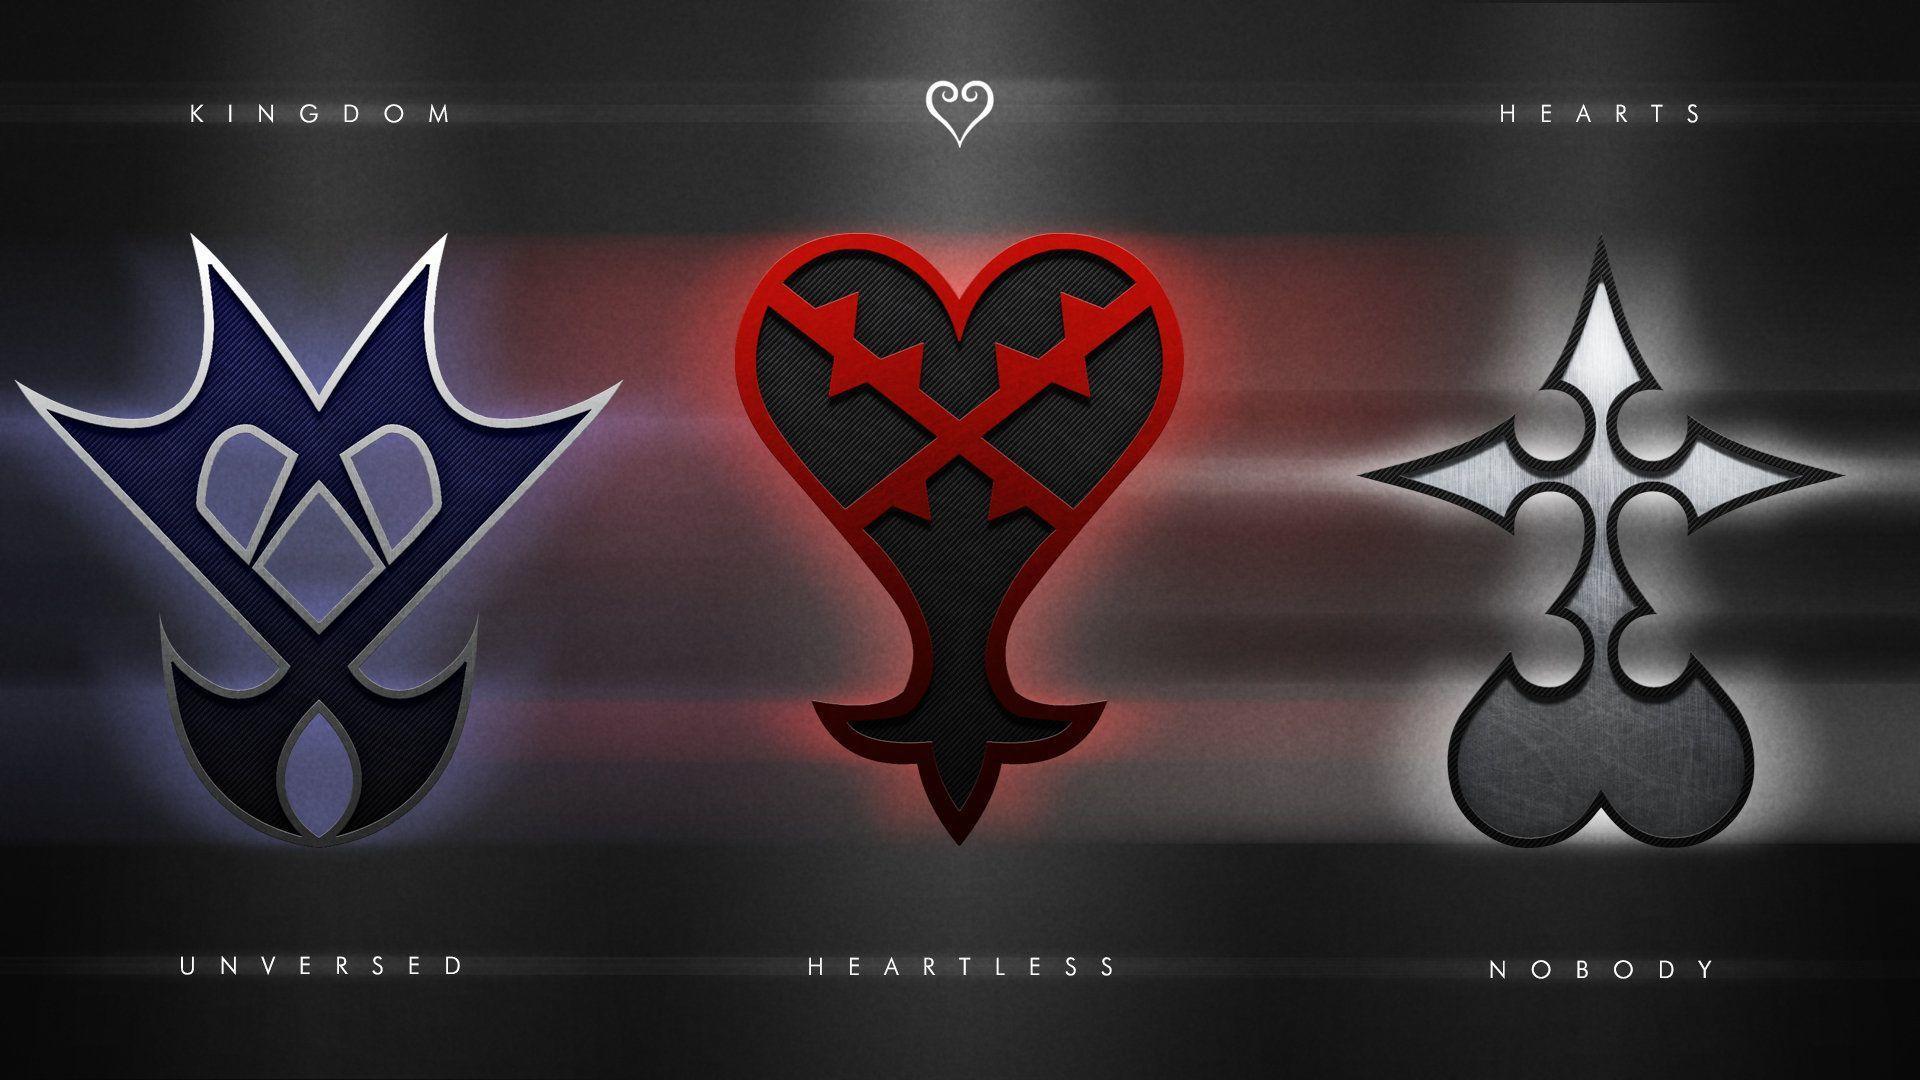 Gallery For Gt Kingdom Hearts Heartless